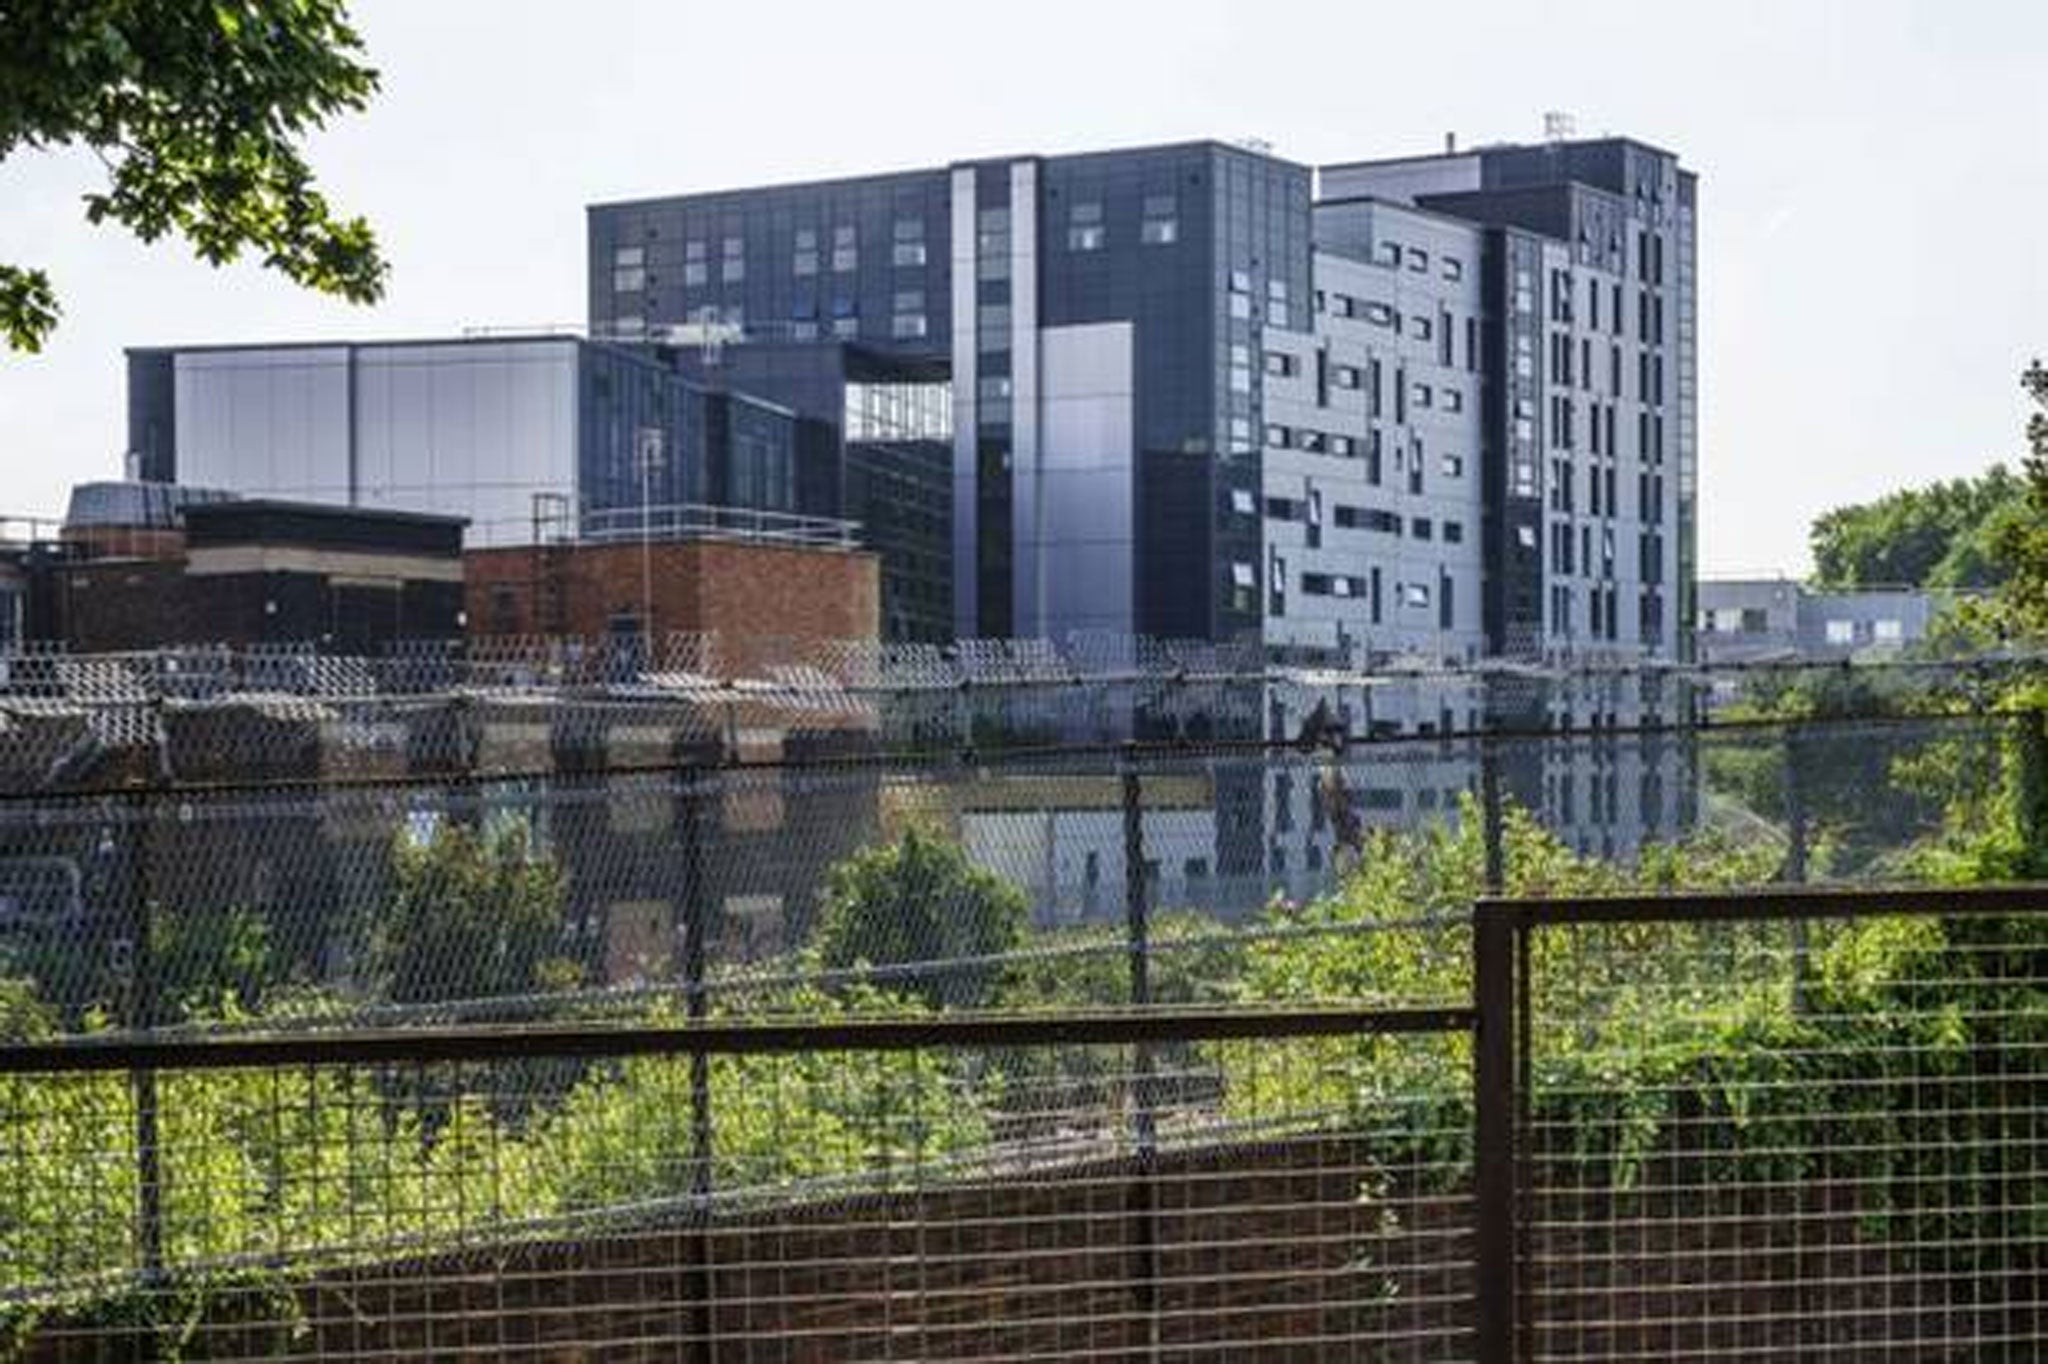 University College London’s brand new £18 million student halls have been named the “worst building in Britain” by an architecture magazine, who compared its “bizarre” design to that of a prison.